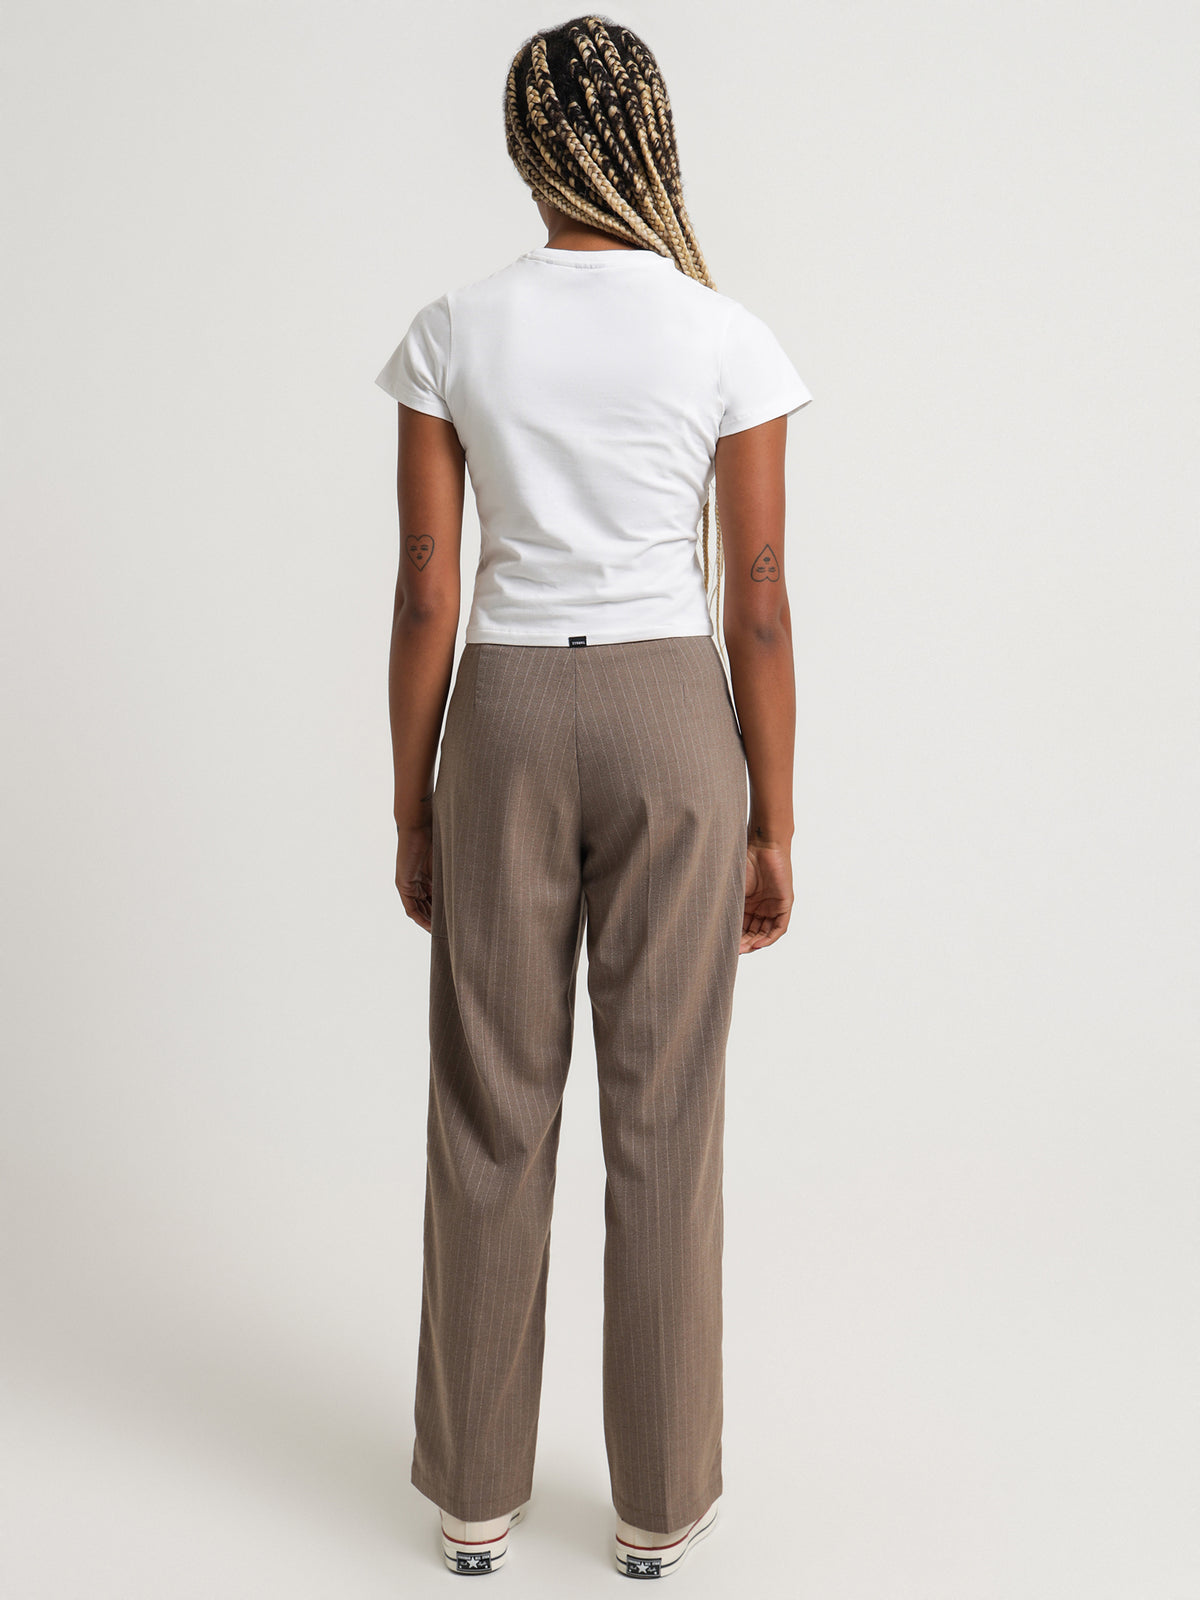 Danny Pinstripe Pants in Taupe - Glue Store